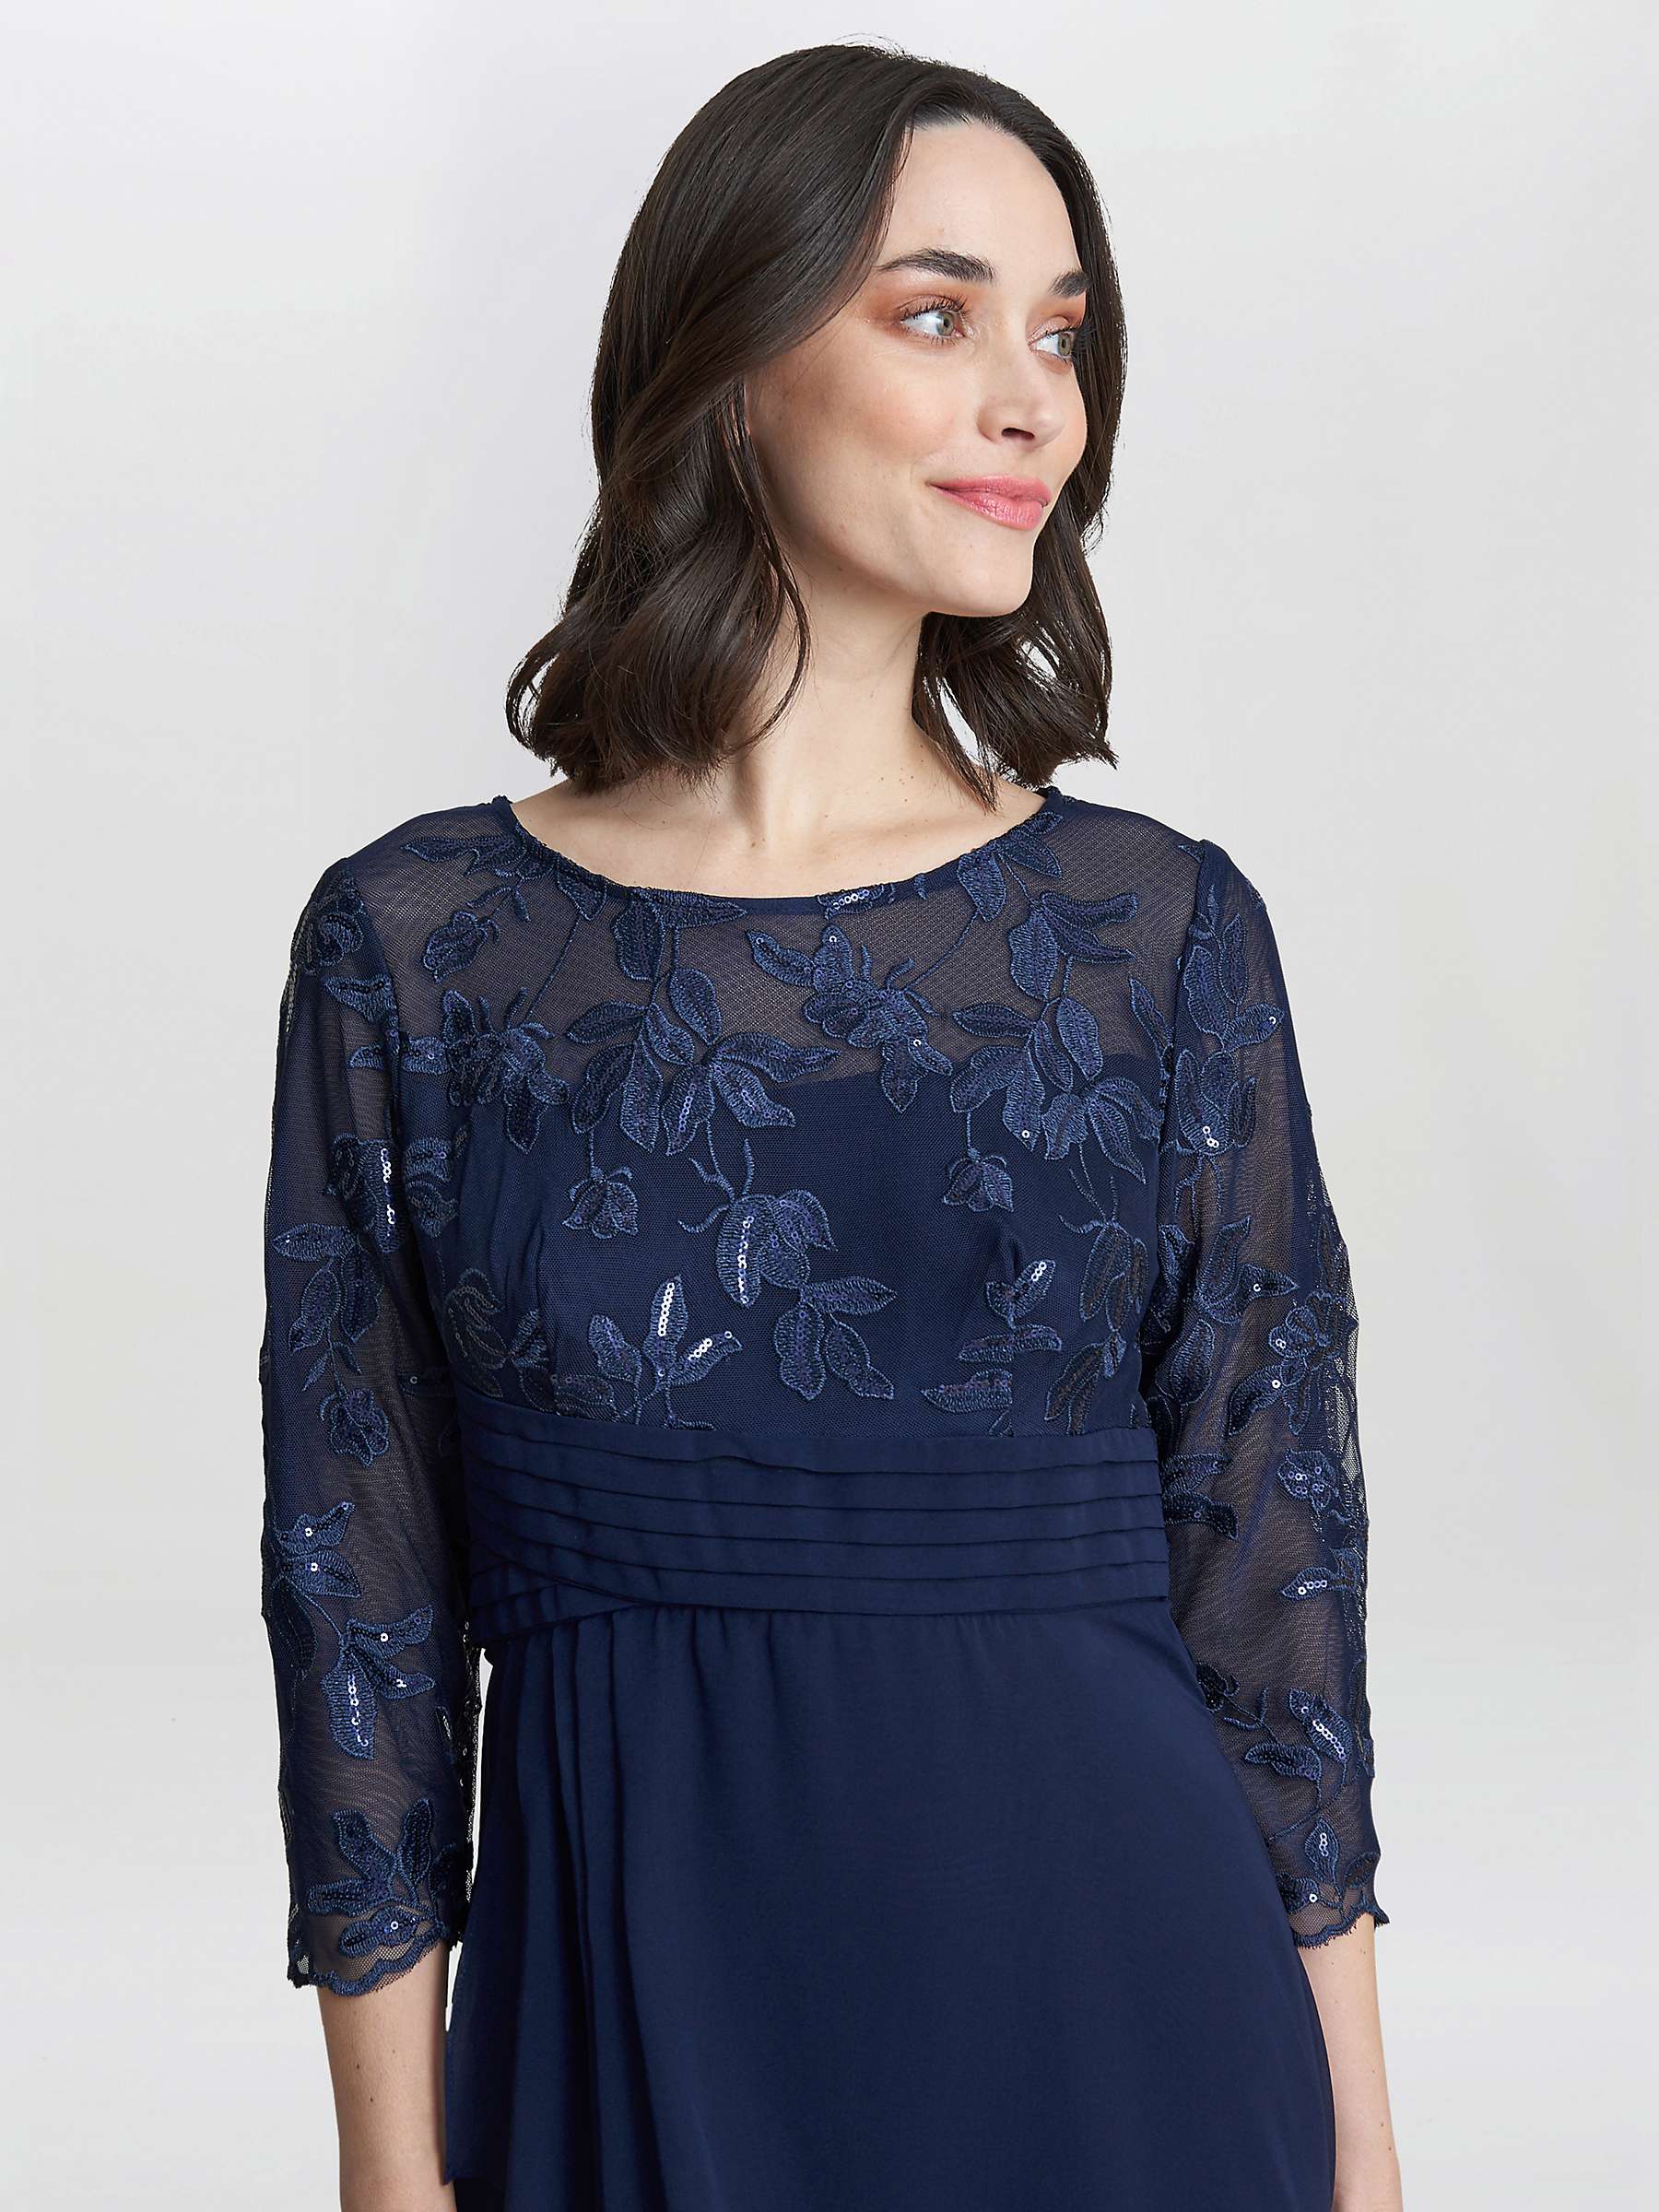 Buy Gina Bacconi Petite Thandie Embroidered Bodice Dress, Navy Online at johnlewis.com